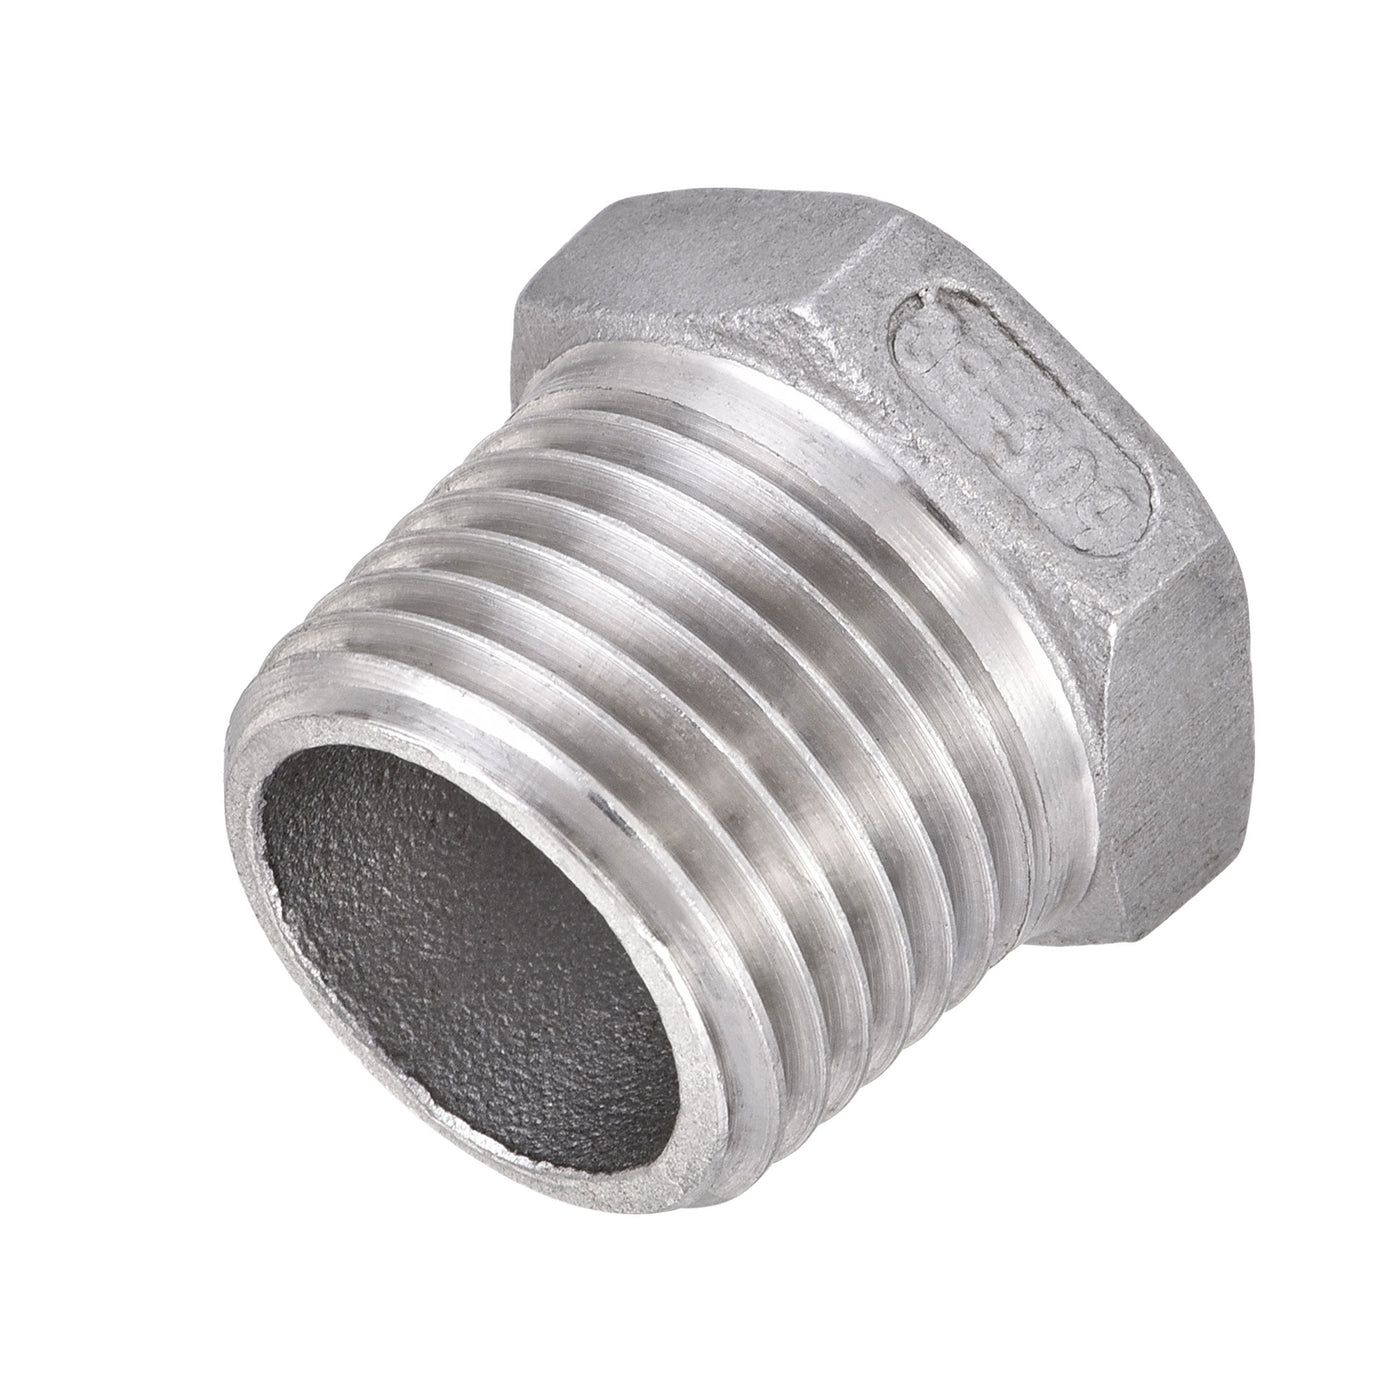 Uxcell Uxcell Reducer Hex Bushing, 304 Stainless Steel 1/2NPT Male to 3/8NPT Female, Reducing Forging Pipe Hose Adapter Fitting 2Pcs